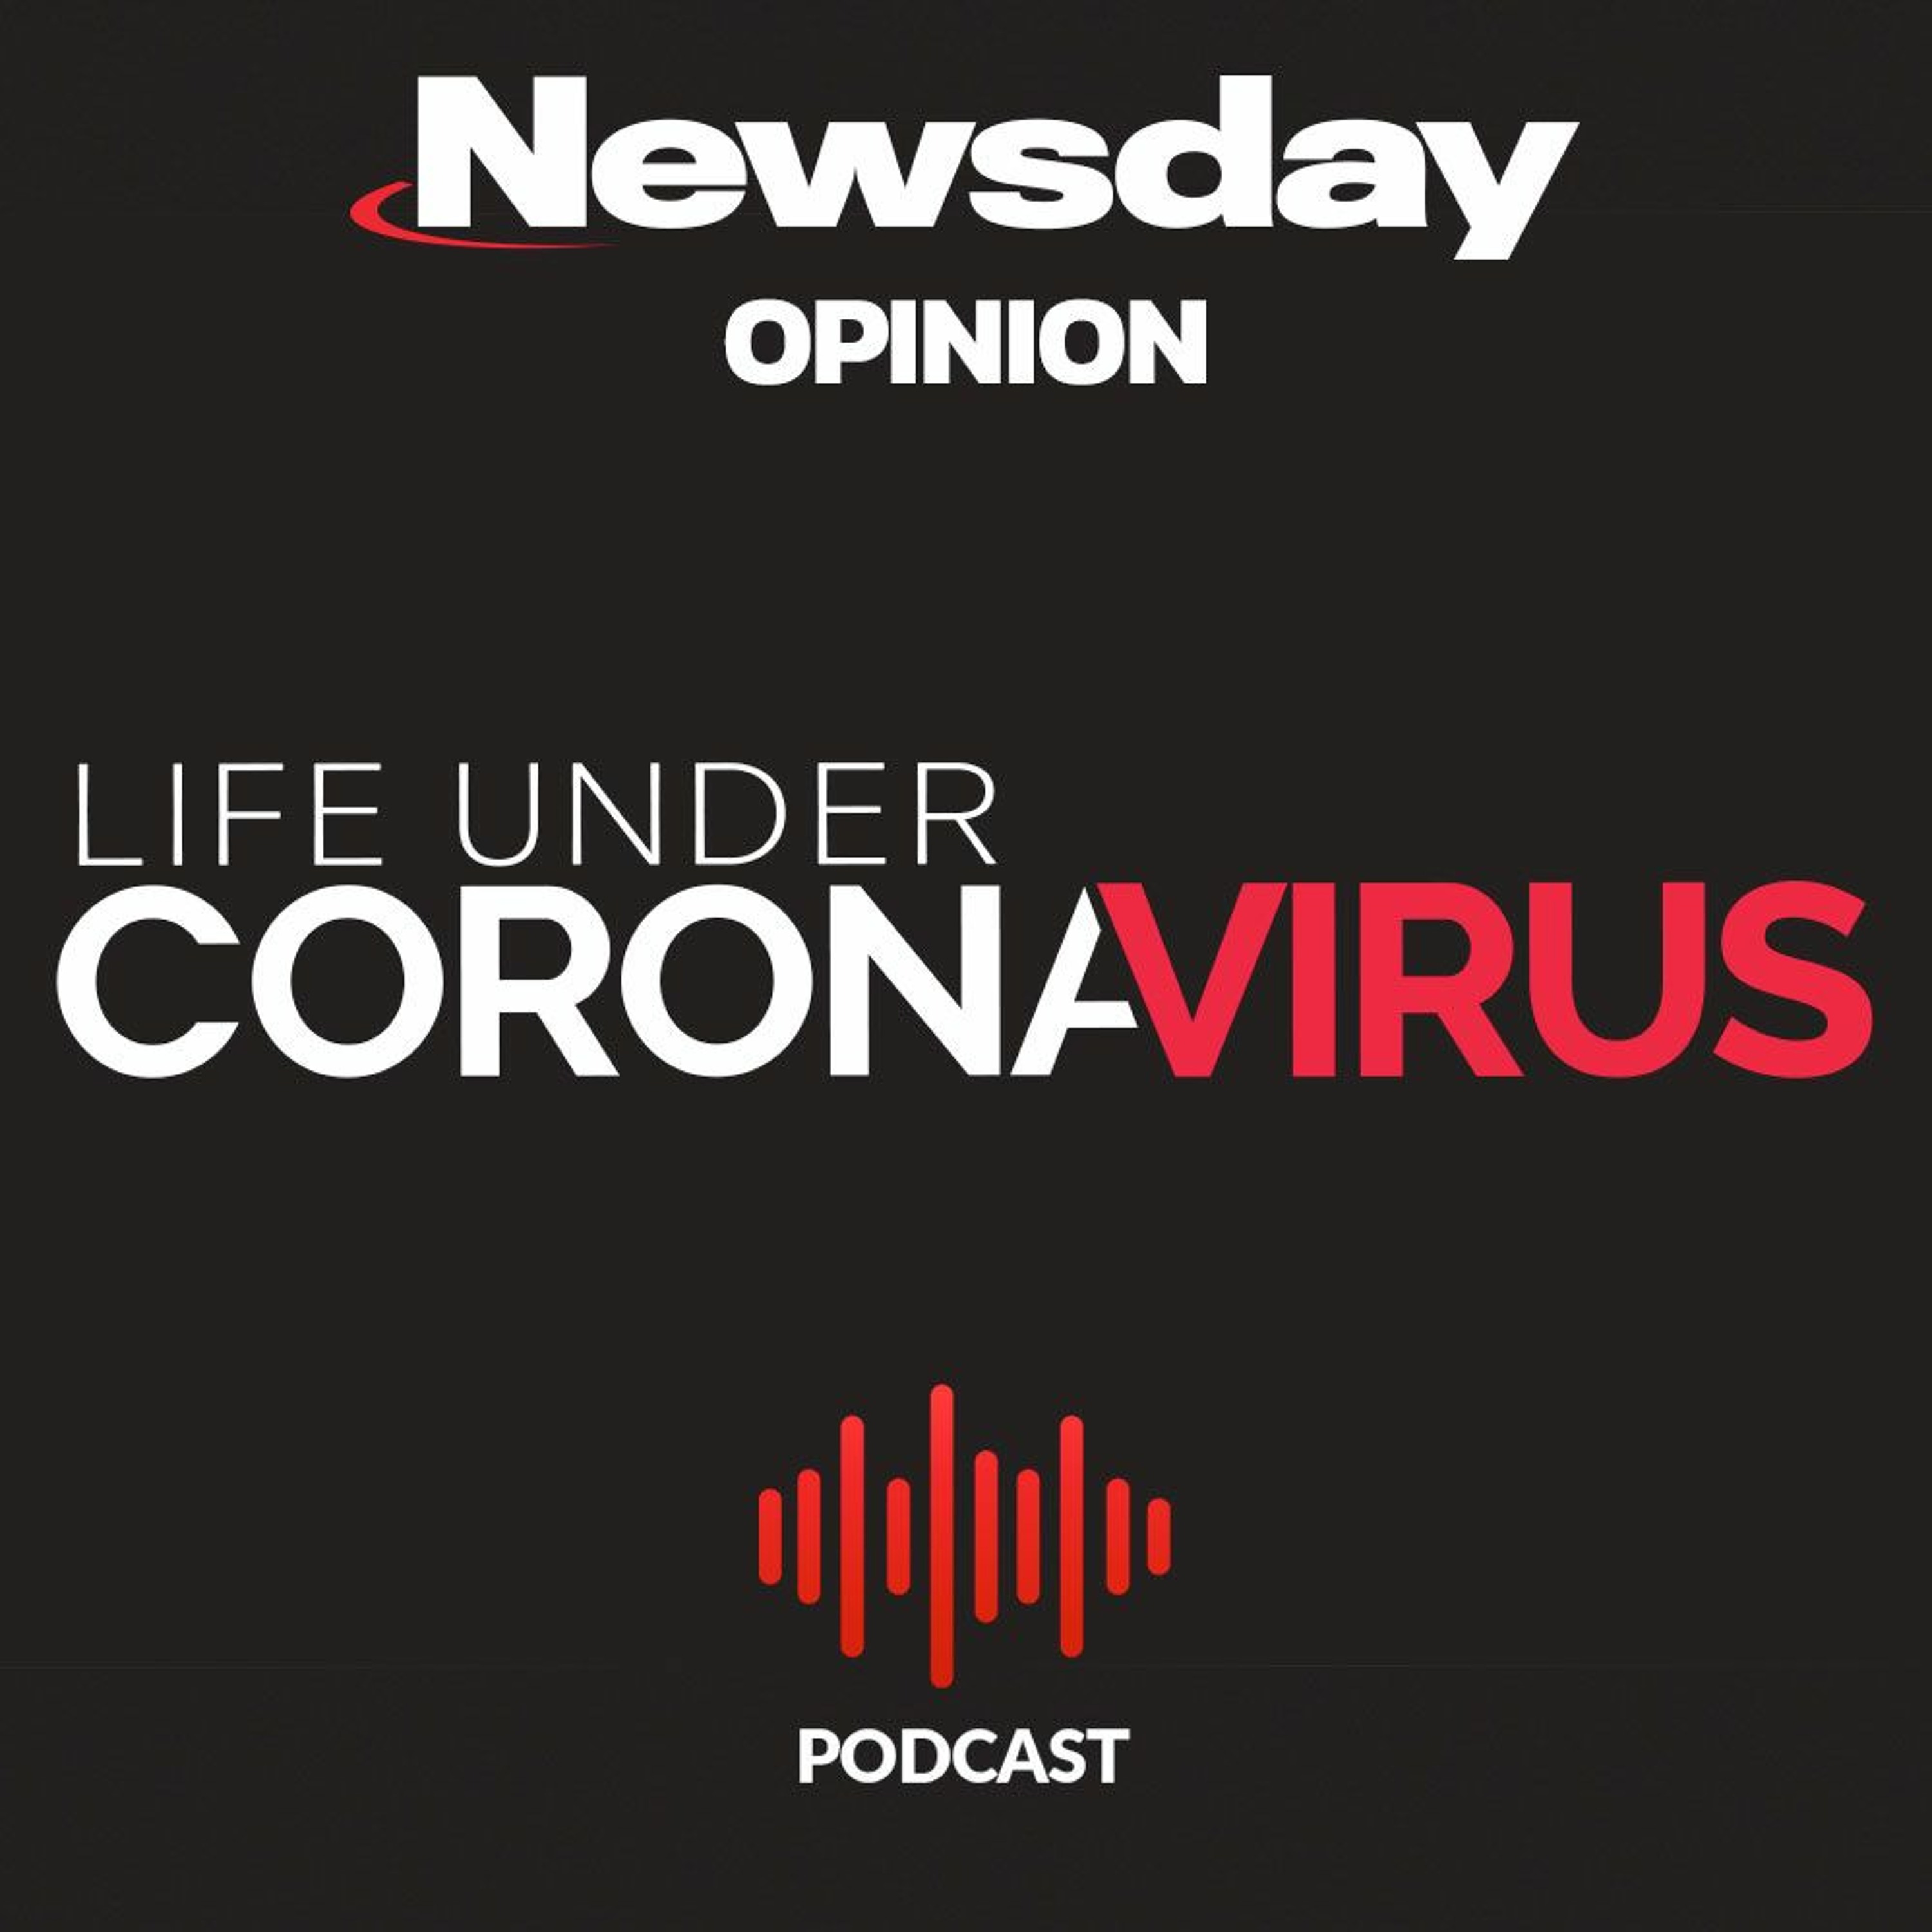 Life Under Coronavirus: The zoo during a pandemic